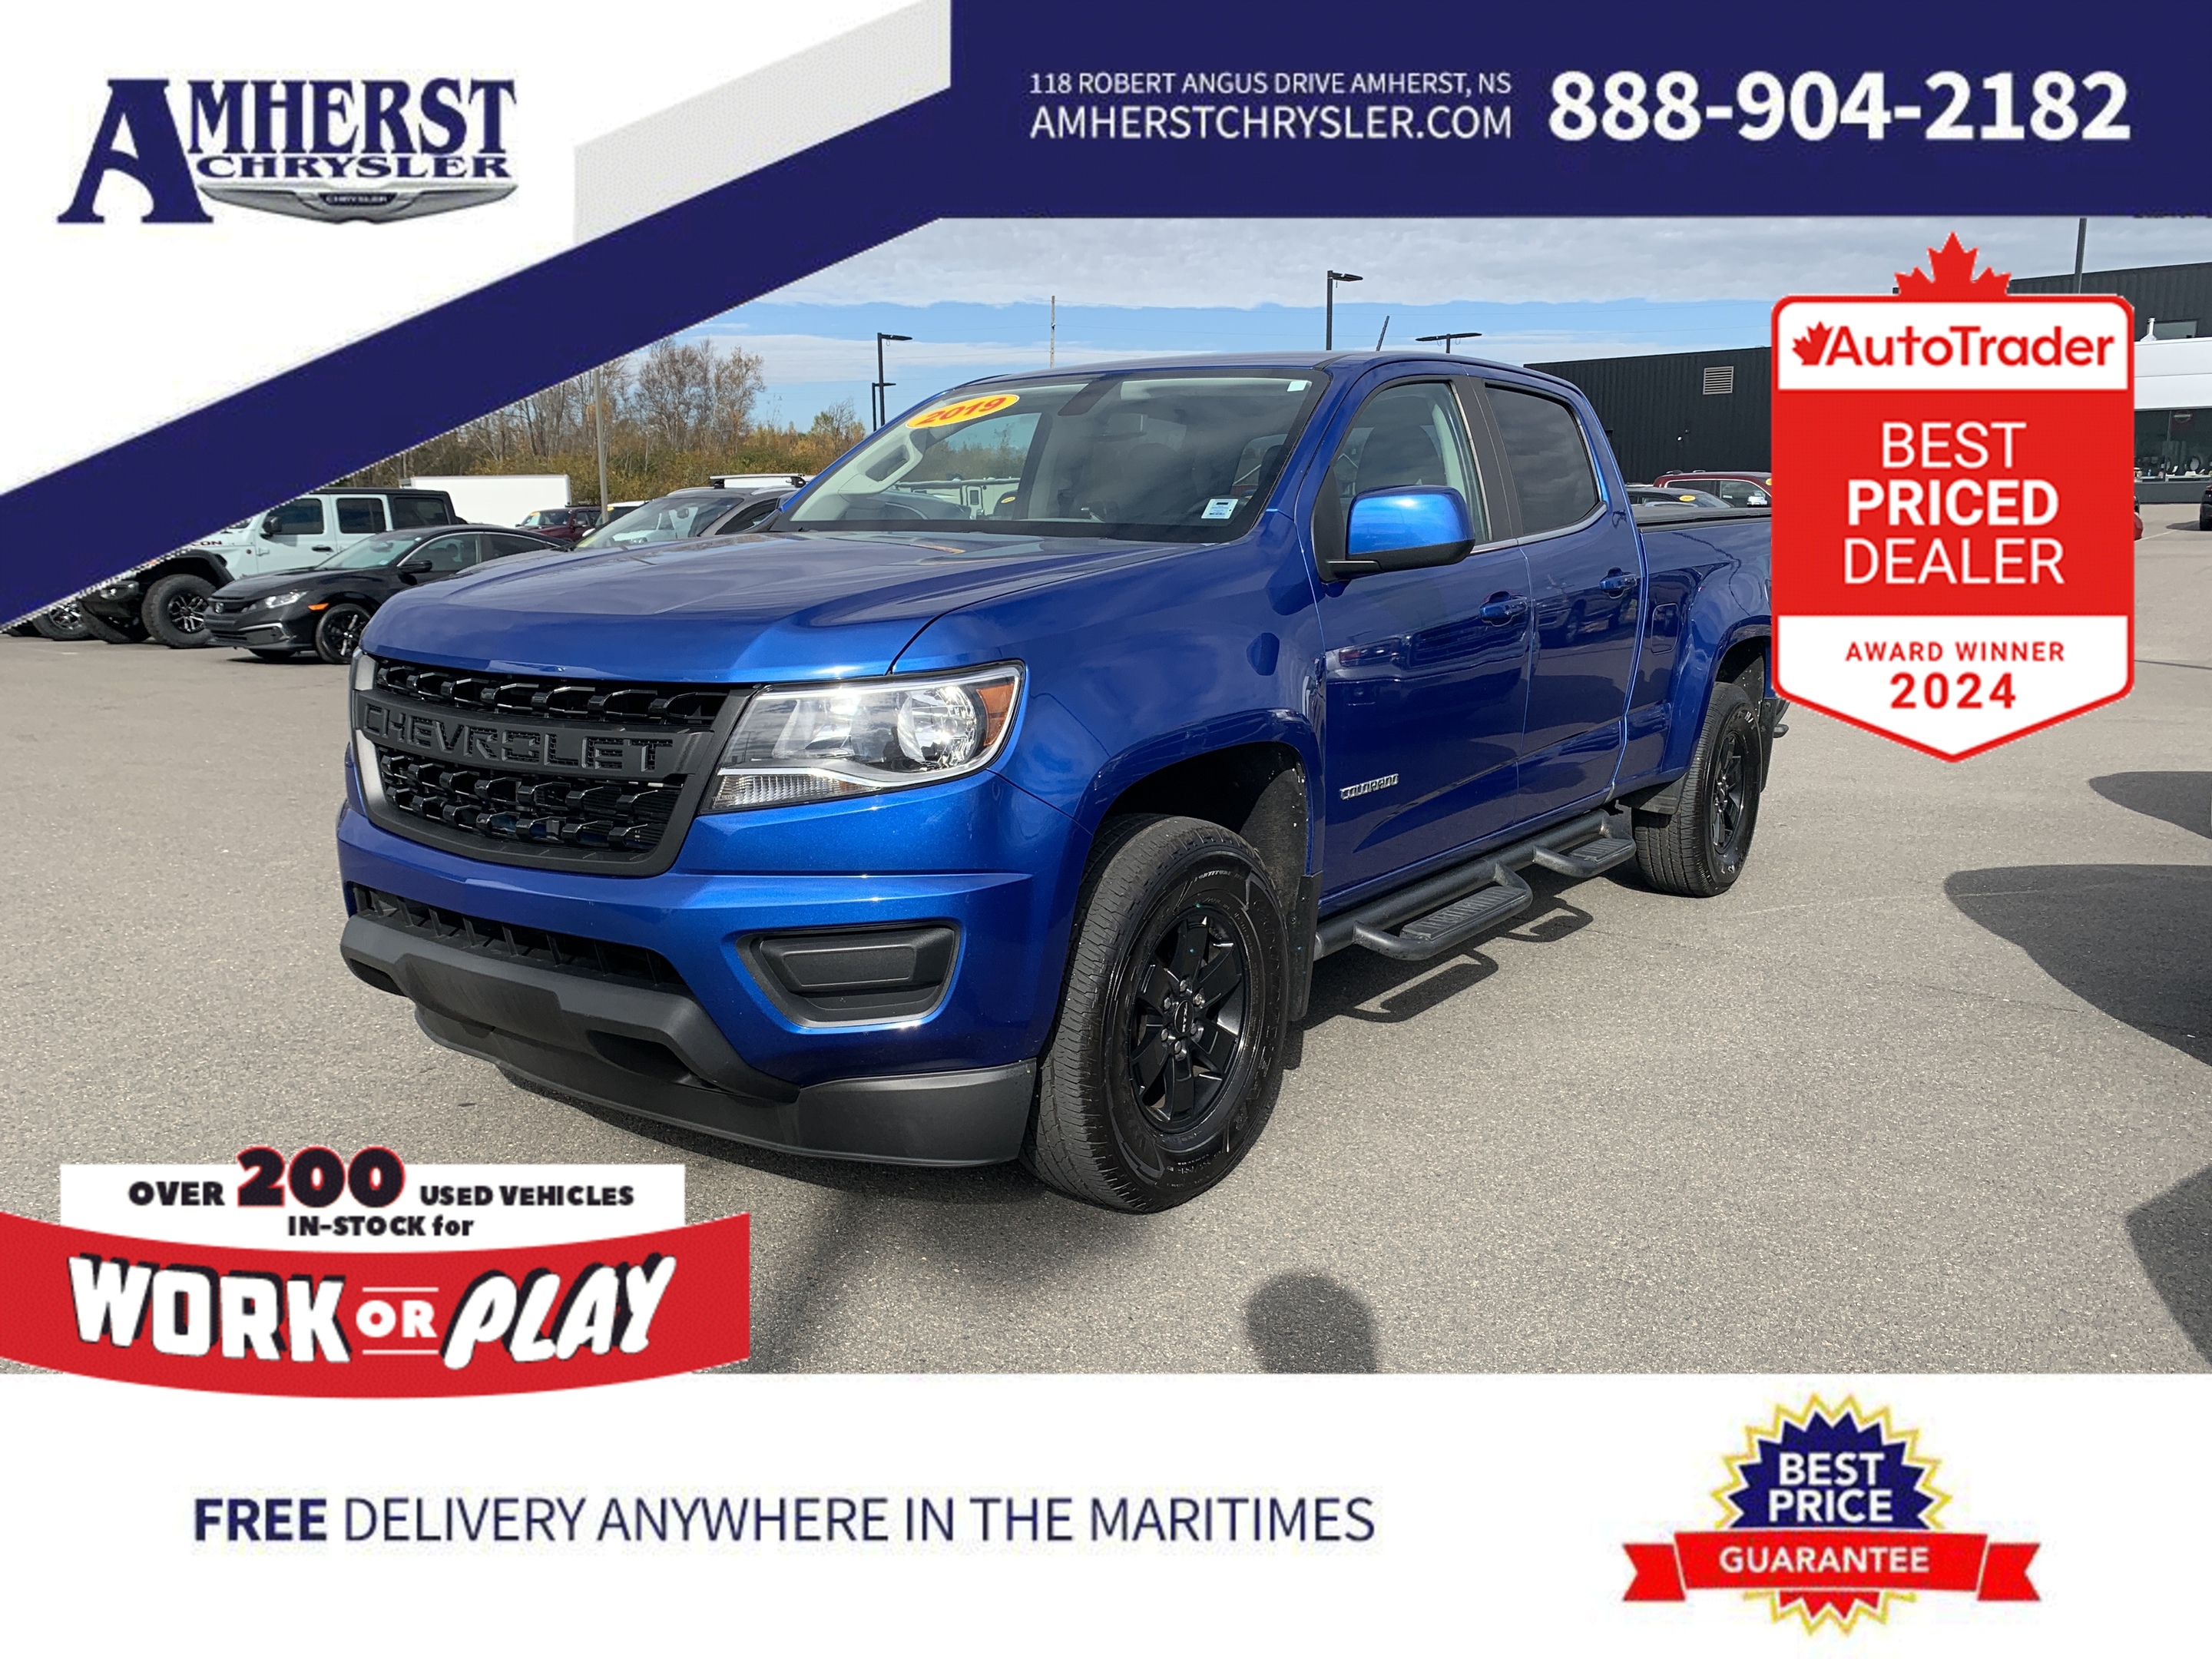 2019 Chevrolet Colorado ONLY $289 B/W CREW!! 4X4 !! BLACKED OUT RIMS!! 